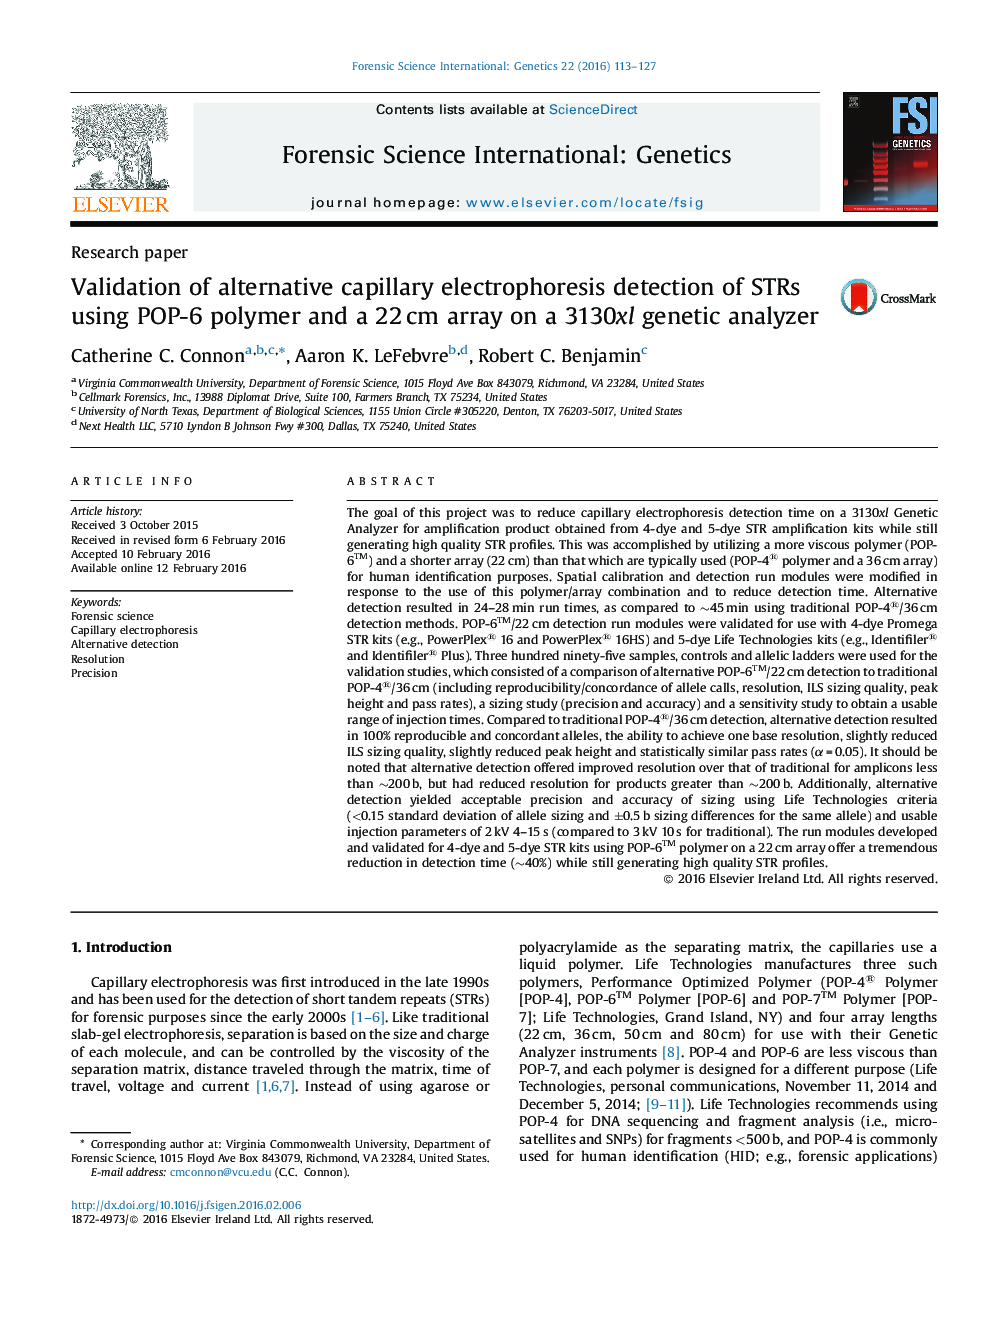 Validation of alternative capillary electrophoresis detection of STRs using POP-6 polymer and a 22 cm array on a 3130xl genetic analyzer